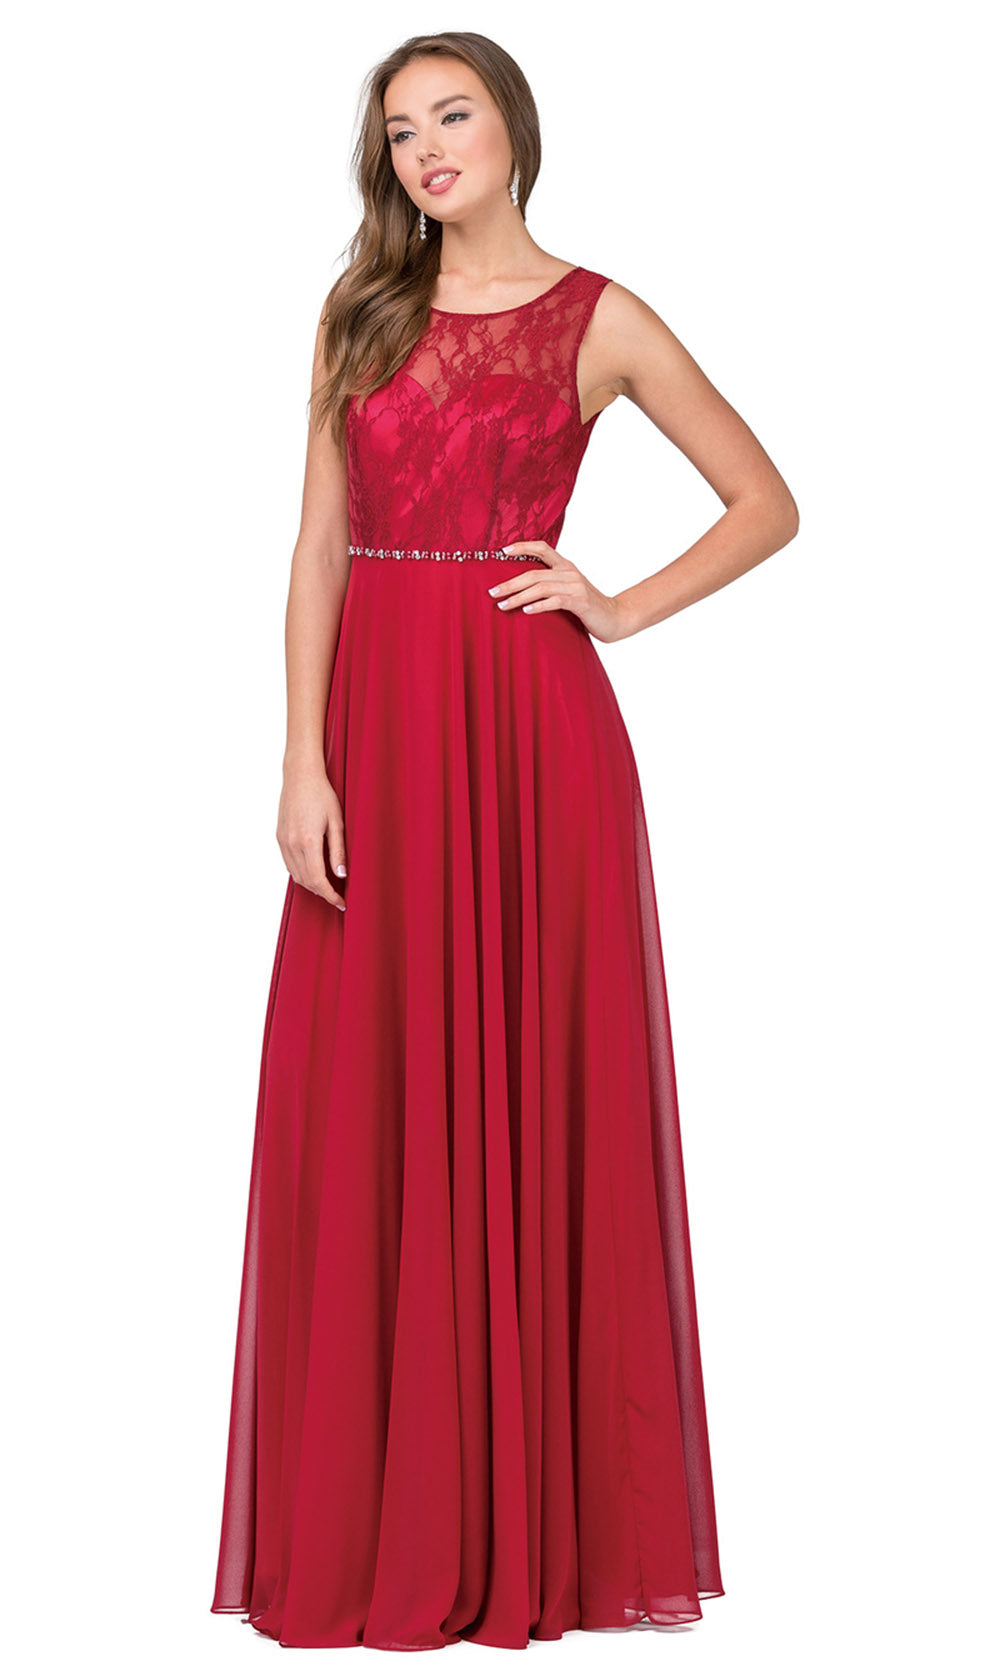 Dancing Queen - 2240 Illusion Neckline Lace Bodice A-Line Gown In Burgundy